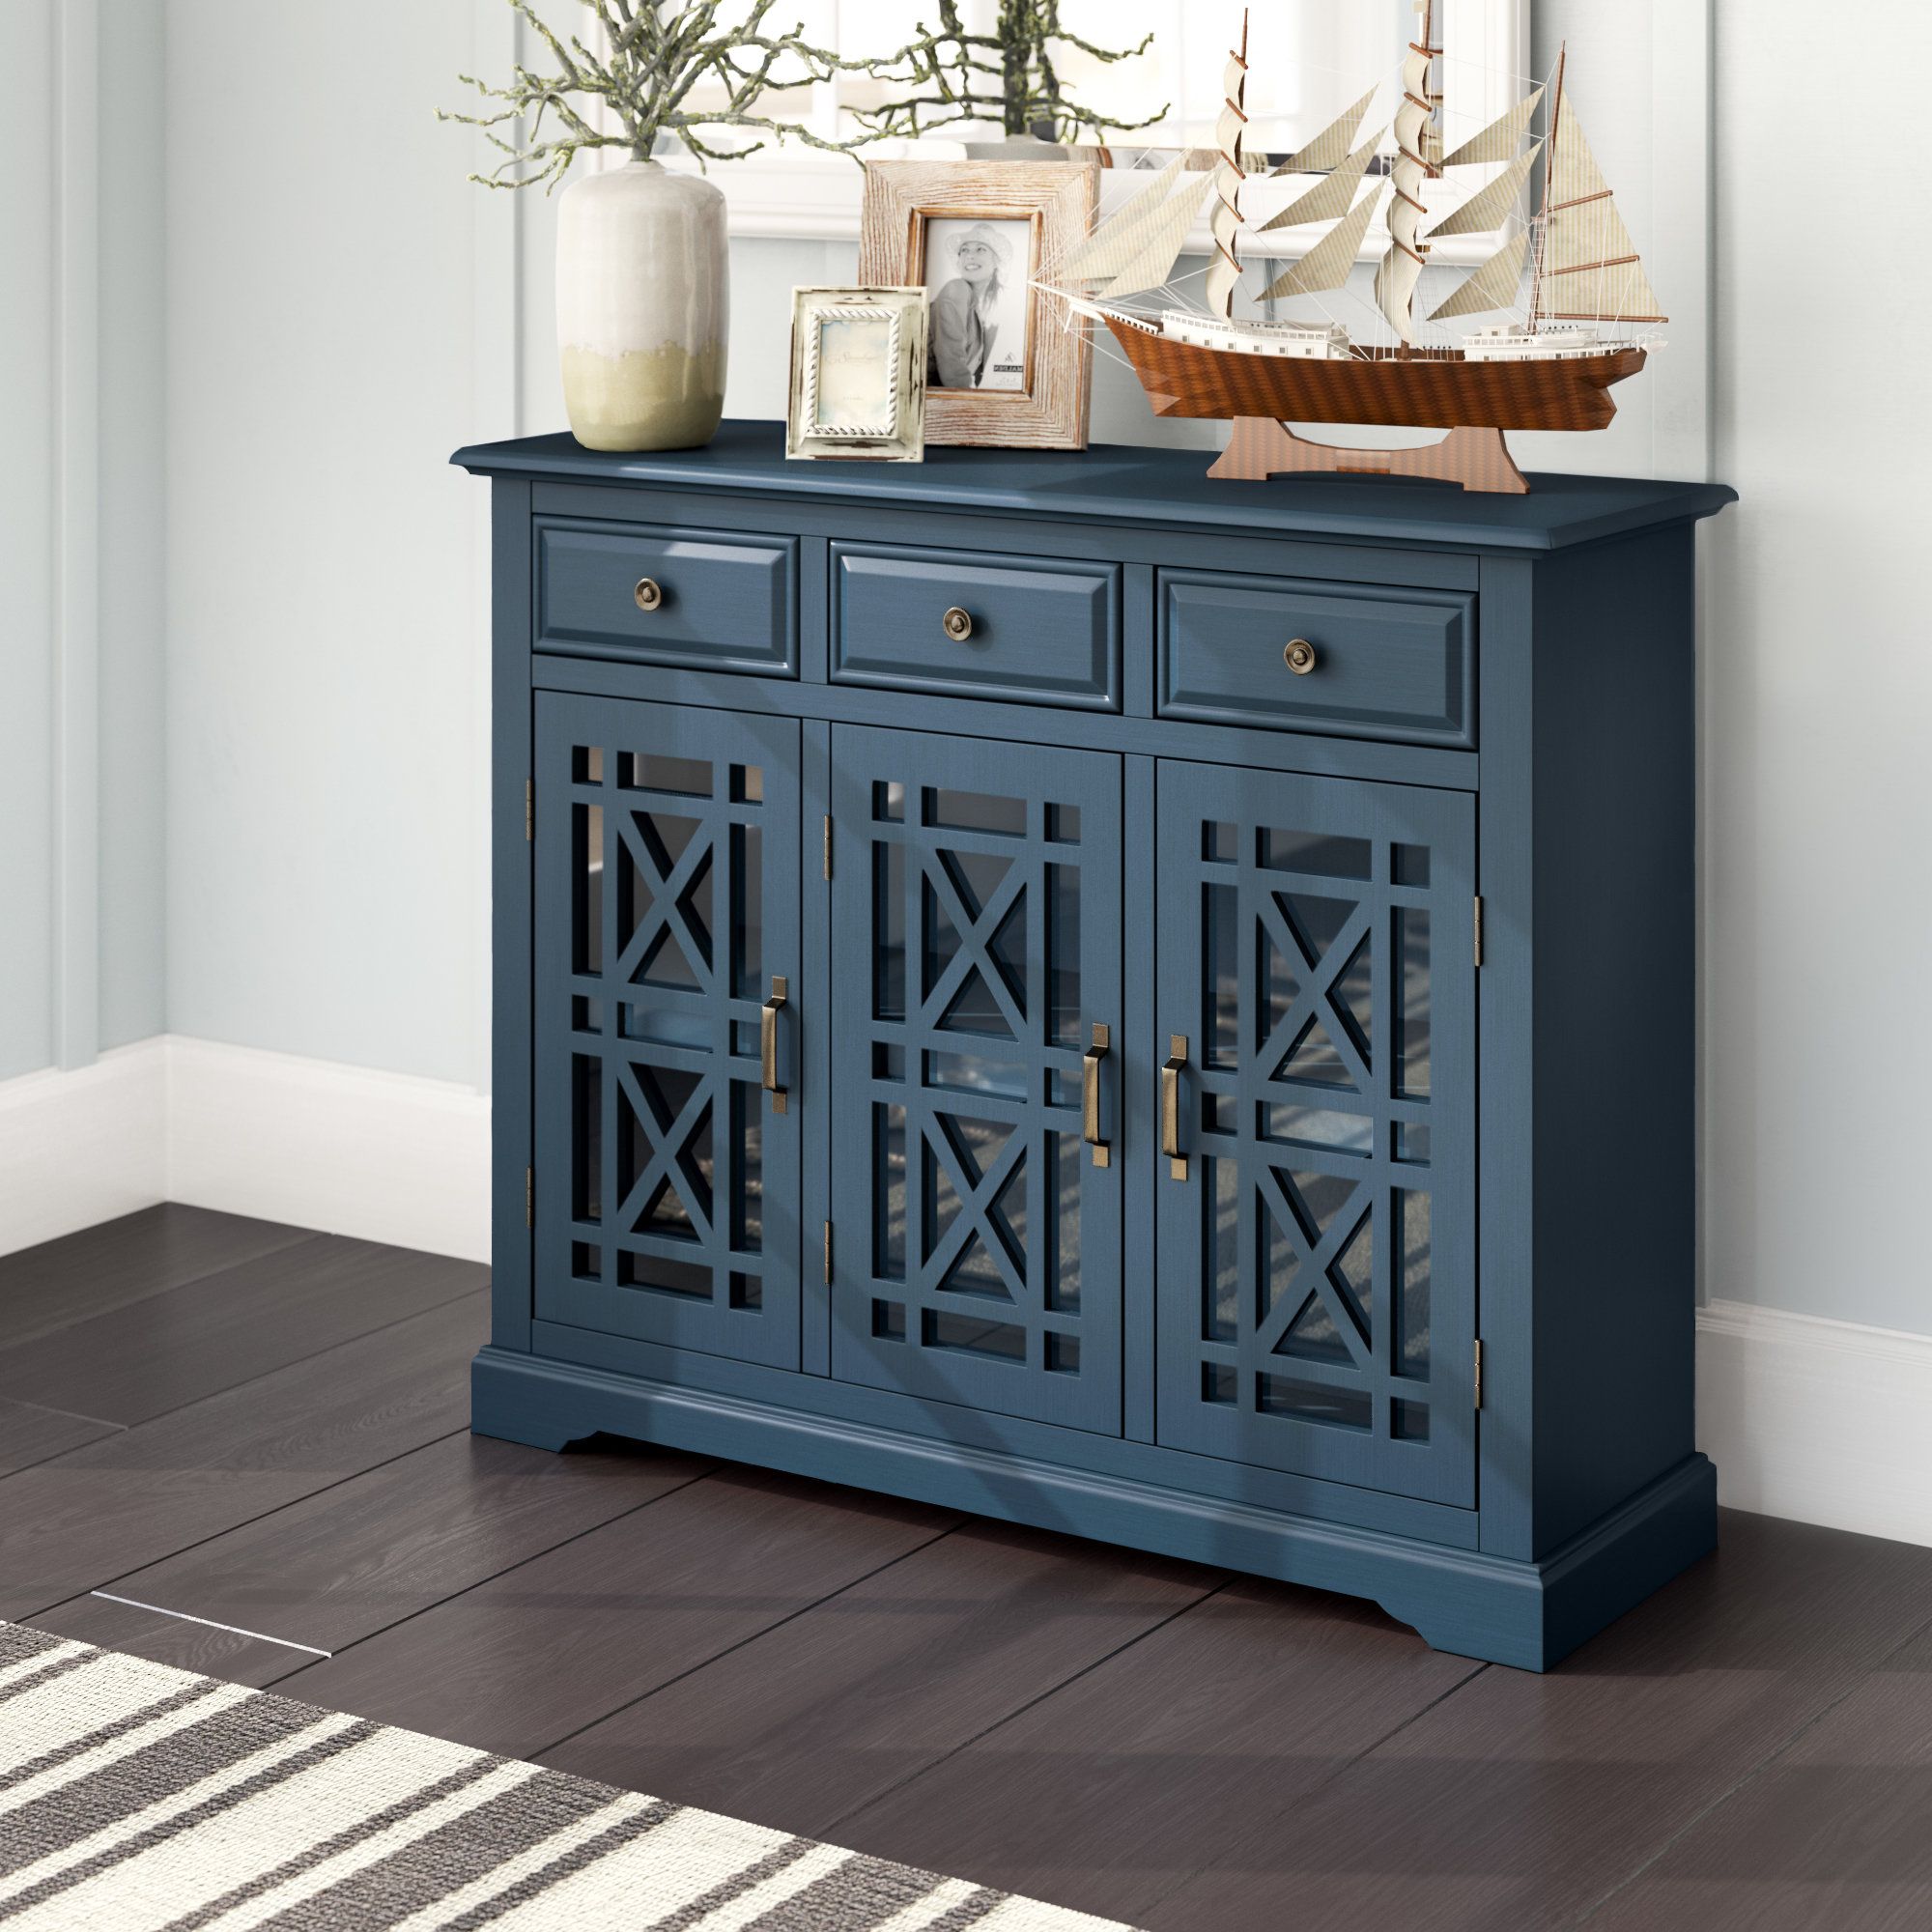 Sideboards & Buffet Tables You'll Love In 2019 | Wayfair Intended For Most Popular Chicoree Charlena Sideboards (View 4 of 20)